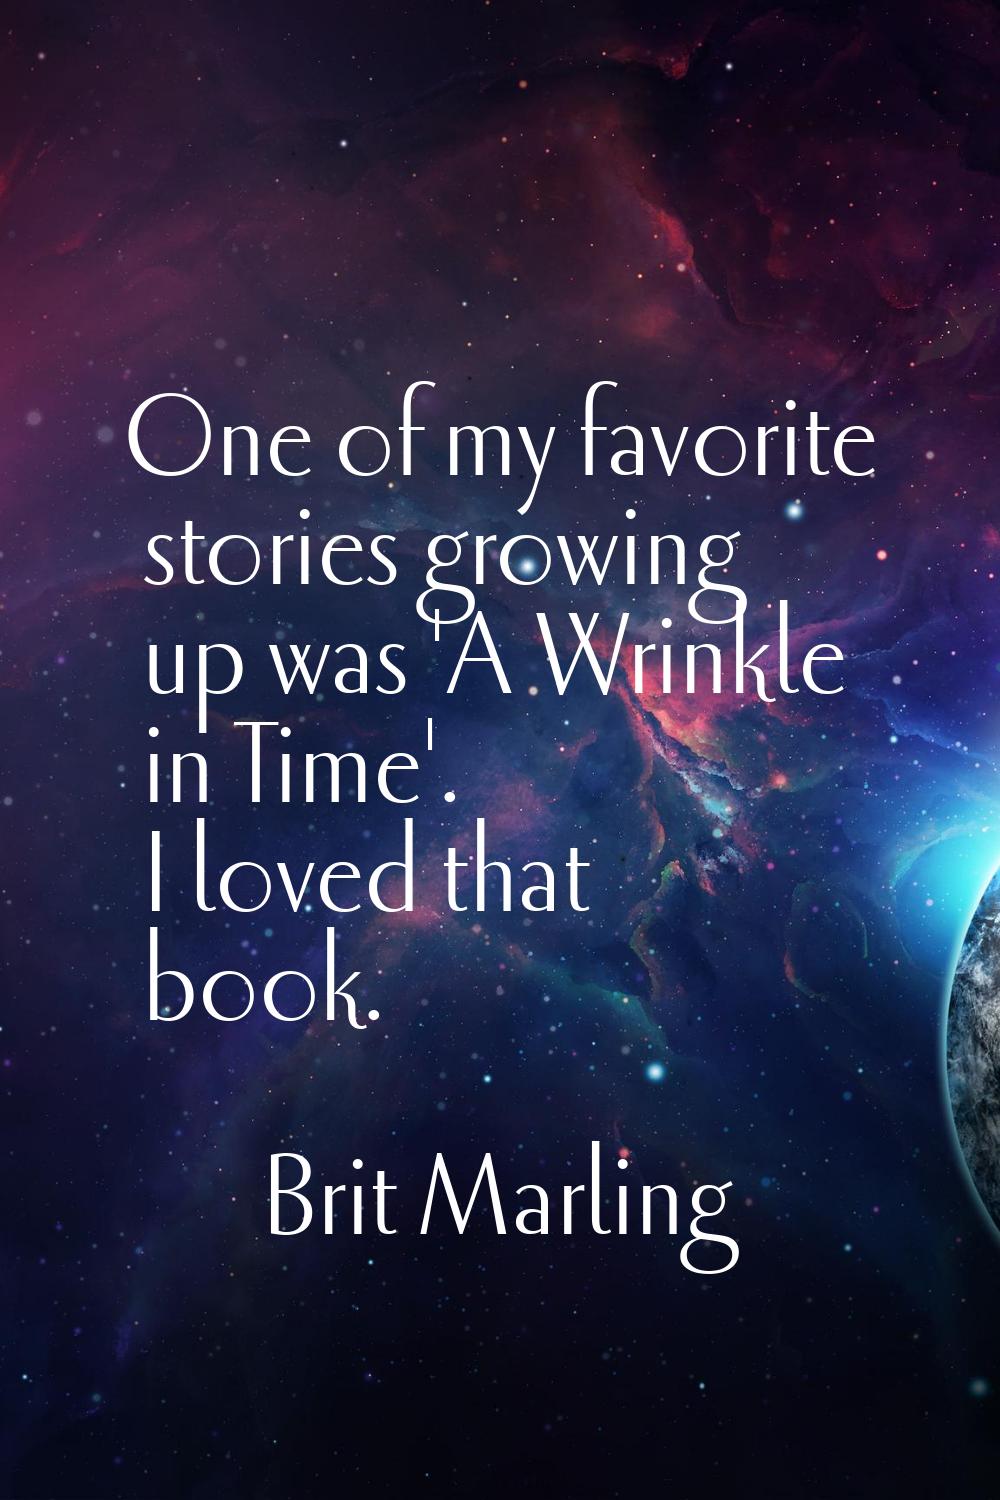 One of my favorite stories growing up was 'A Wrinkle in Time'. I loved that book.